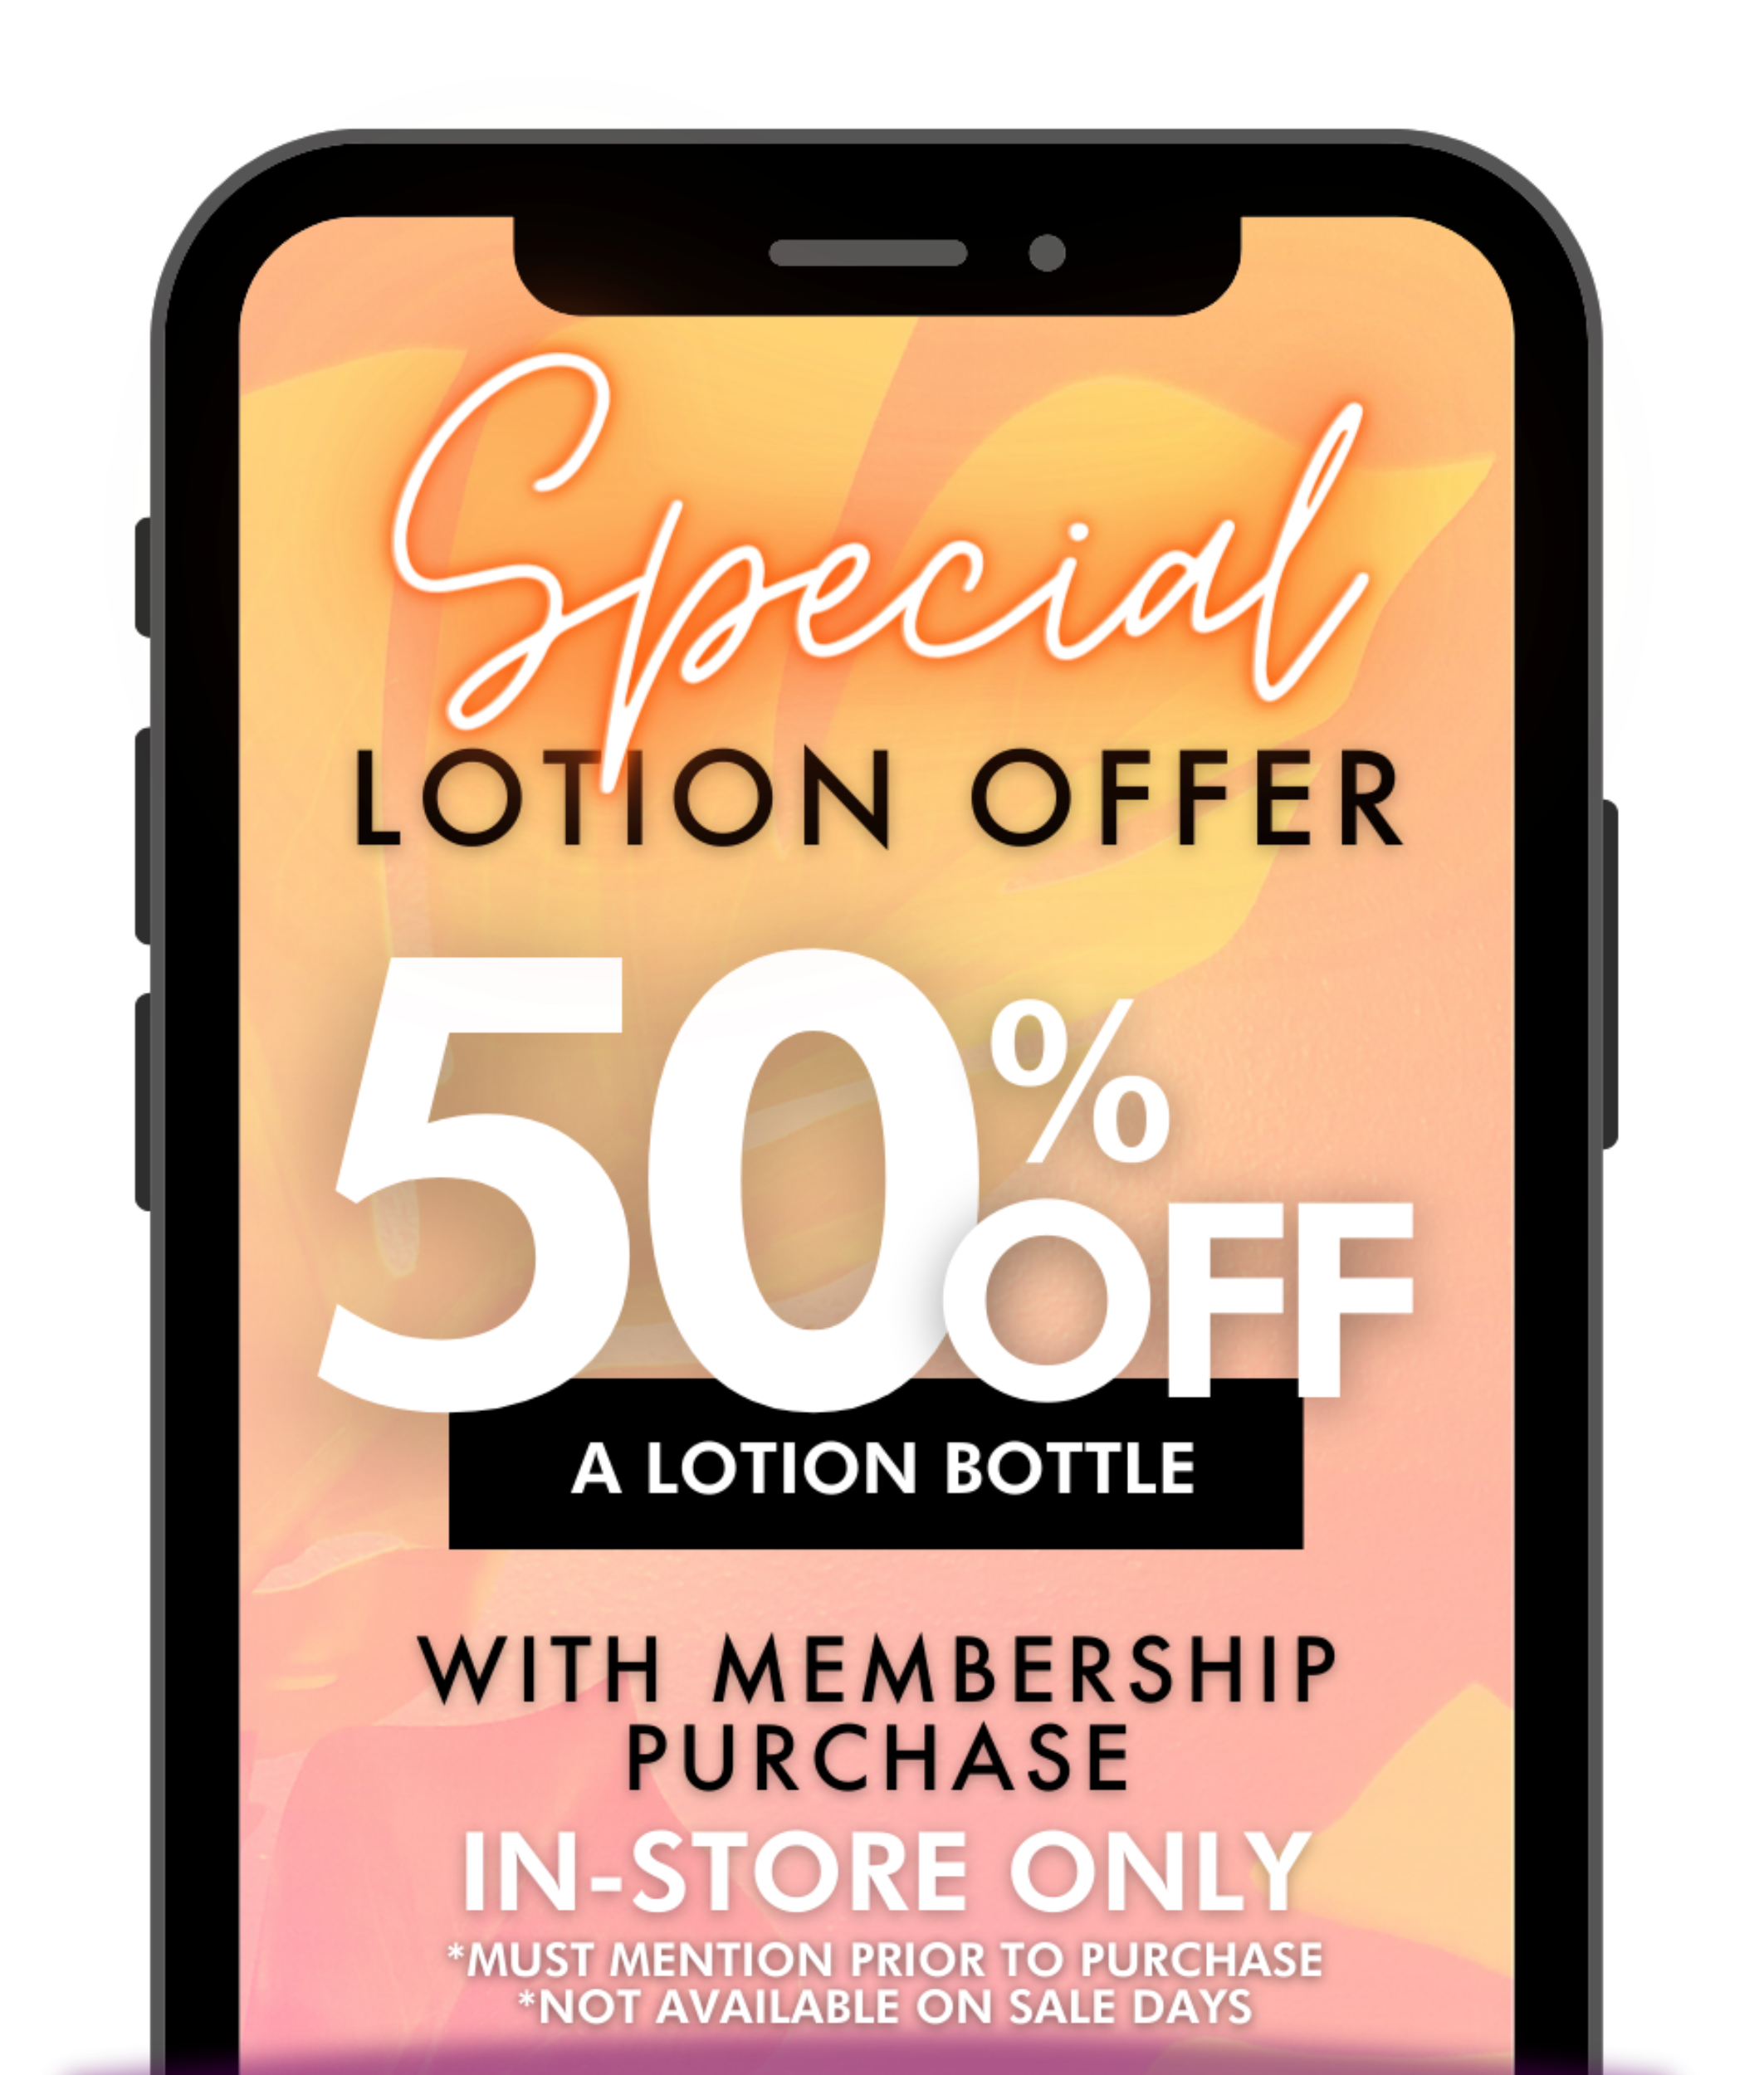 Non-members get 50% off a lotion of your choice with any membership purchase.  Offer not valid on sale days.